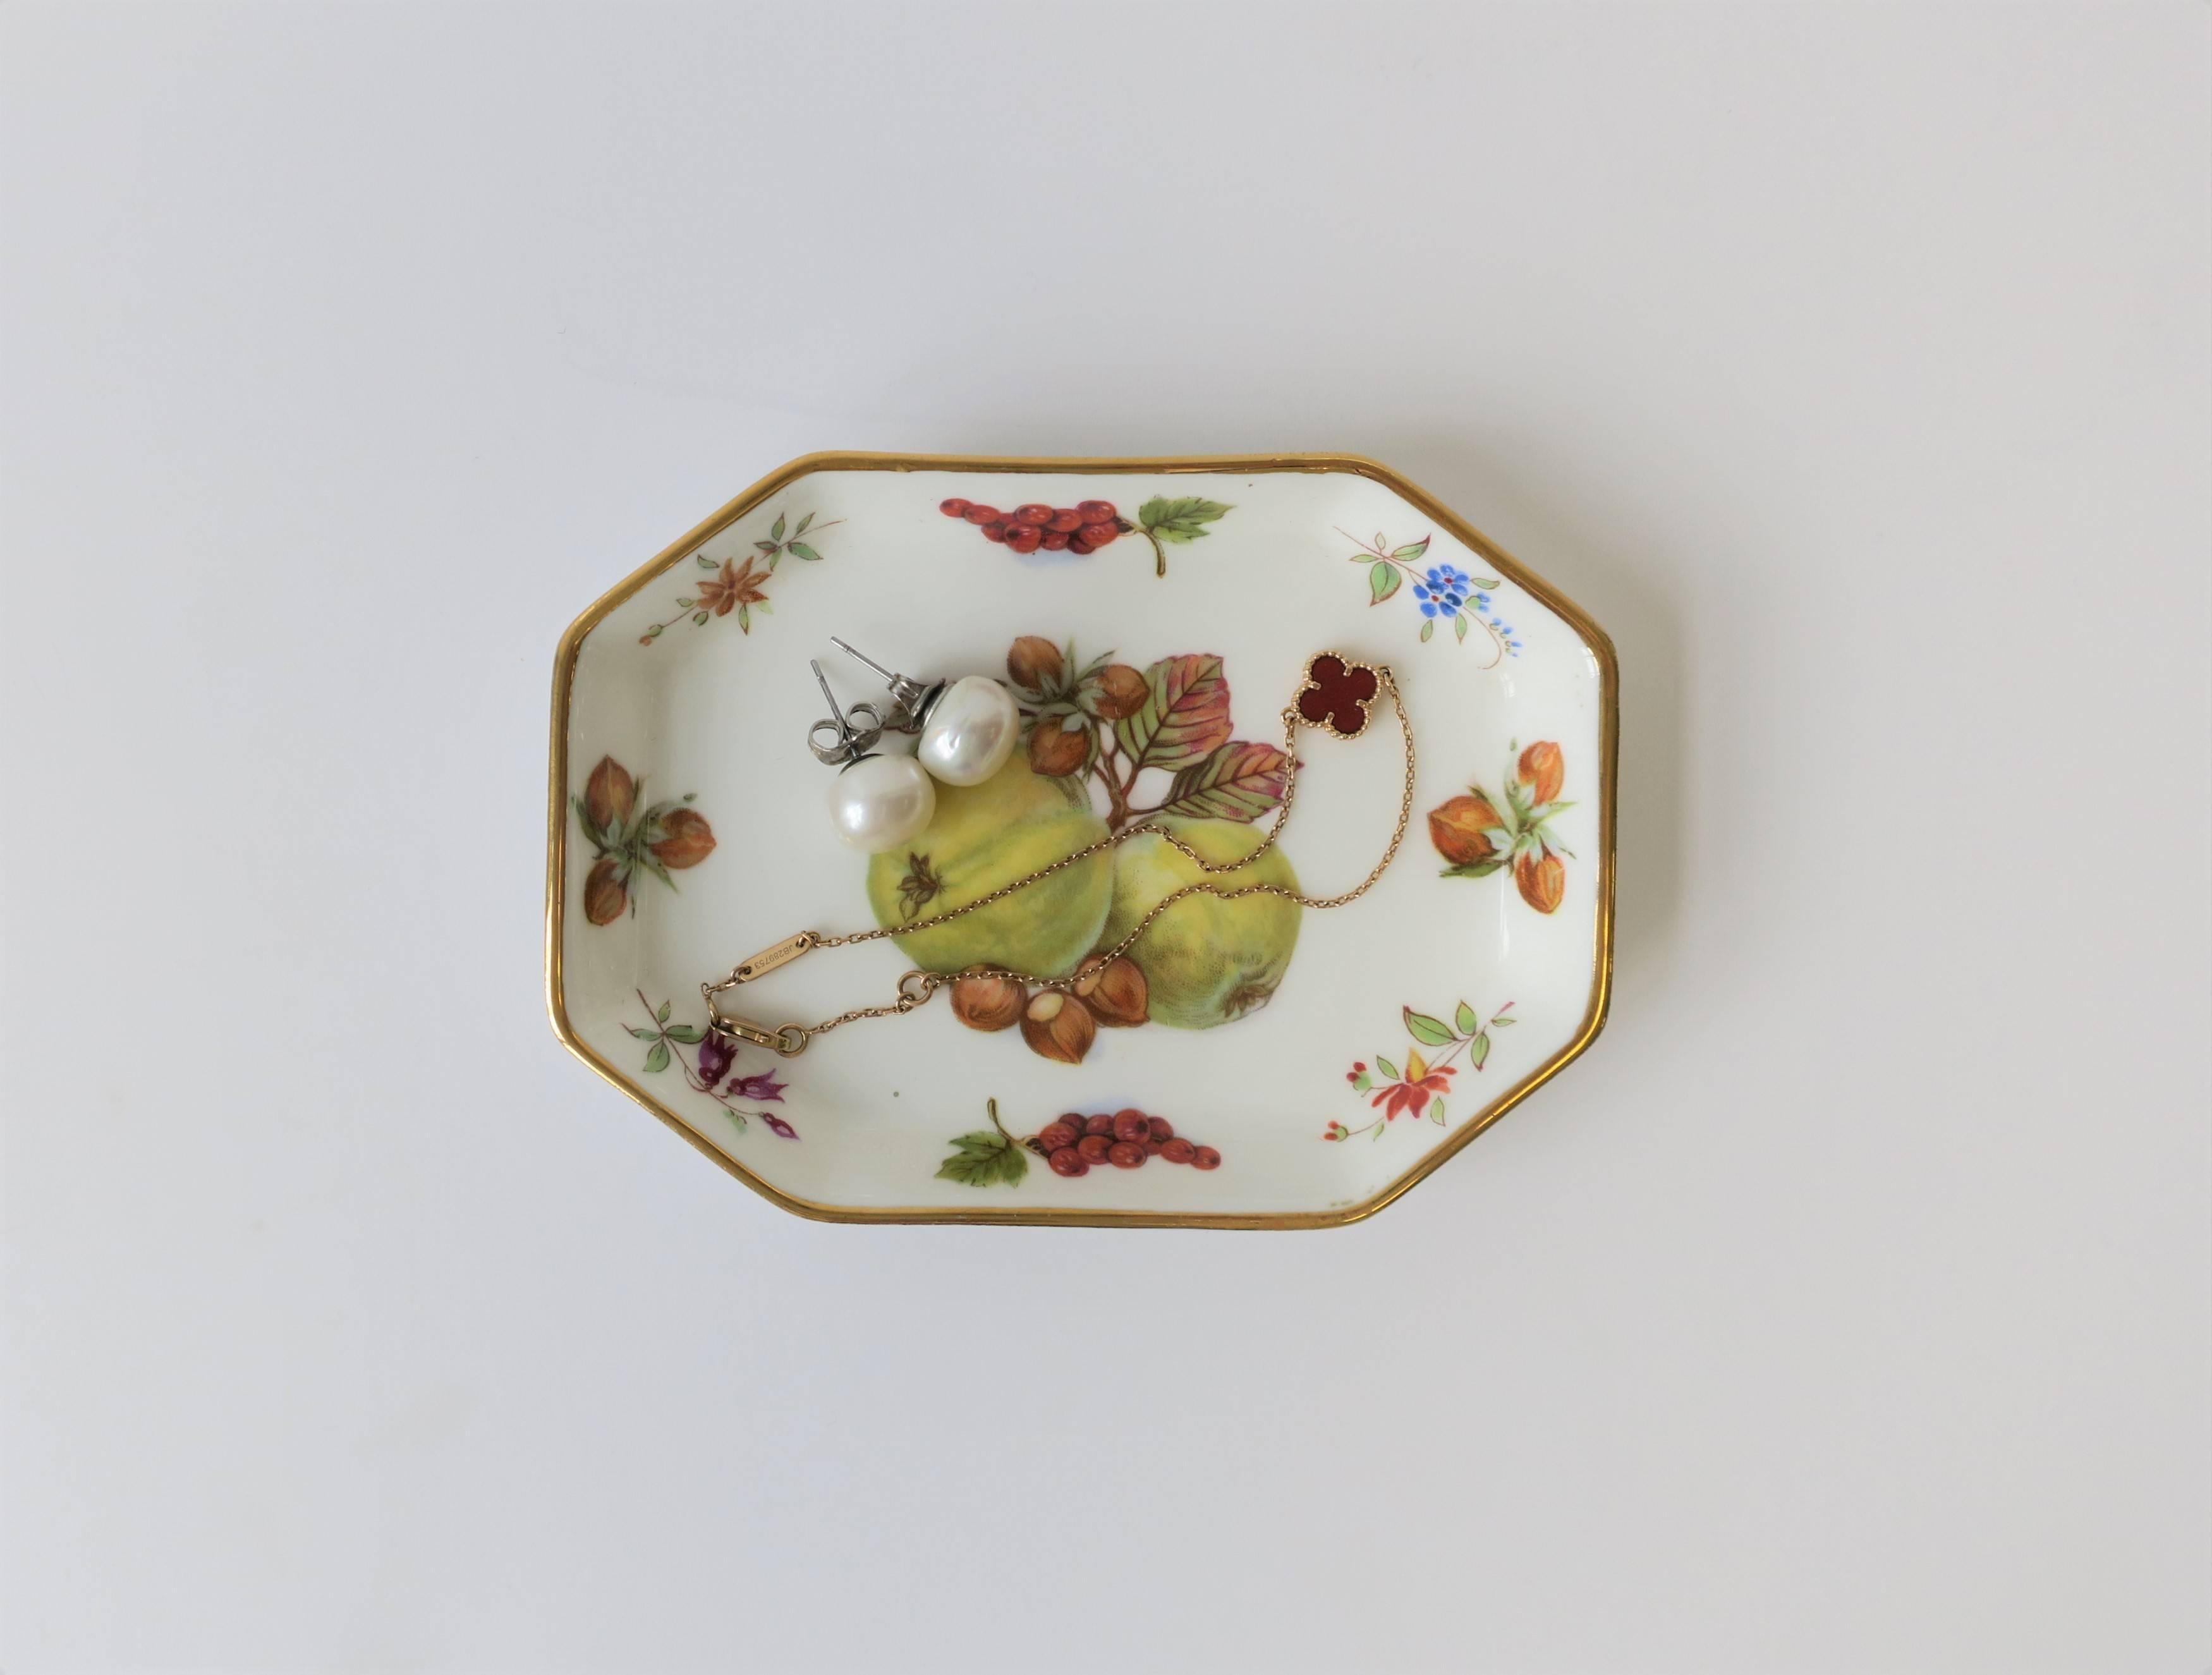 Glazed English Porcelain Jewelry Dish with Fruit Design by Hammersley For Sale